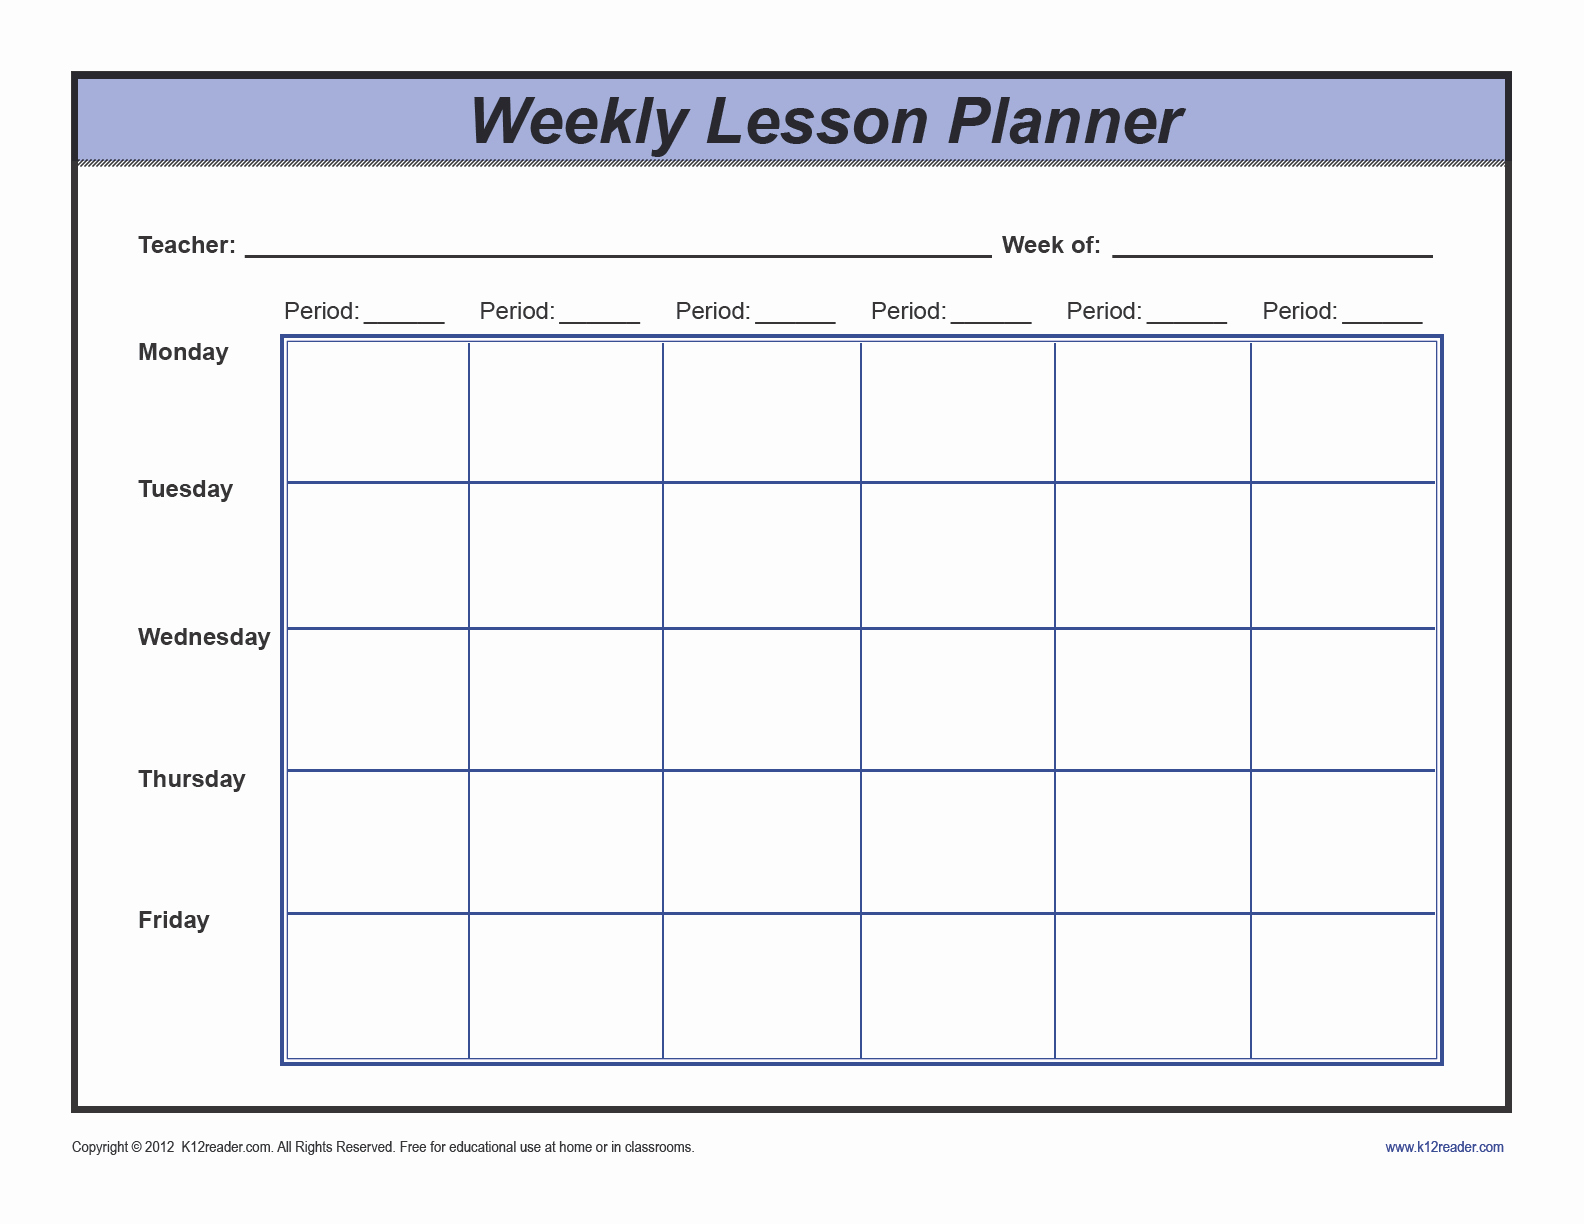 Weekly Lesson Plan Template Word Fresh Download Weekly Lesson Plan Template Preschool